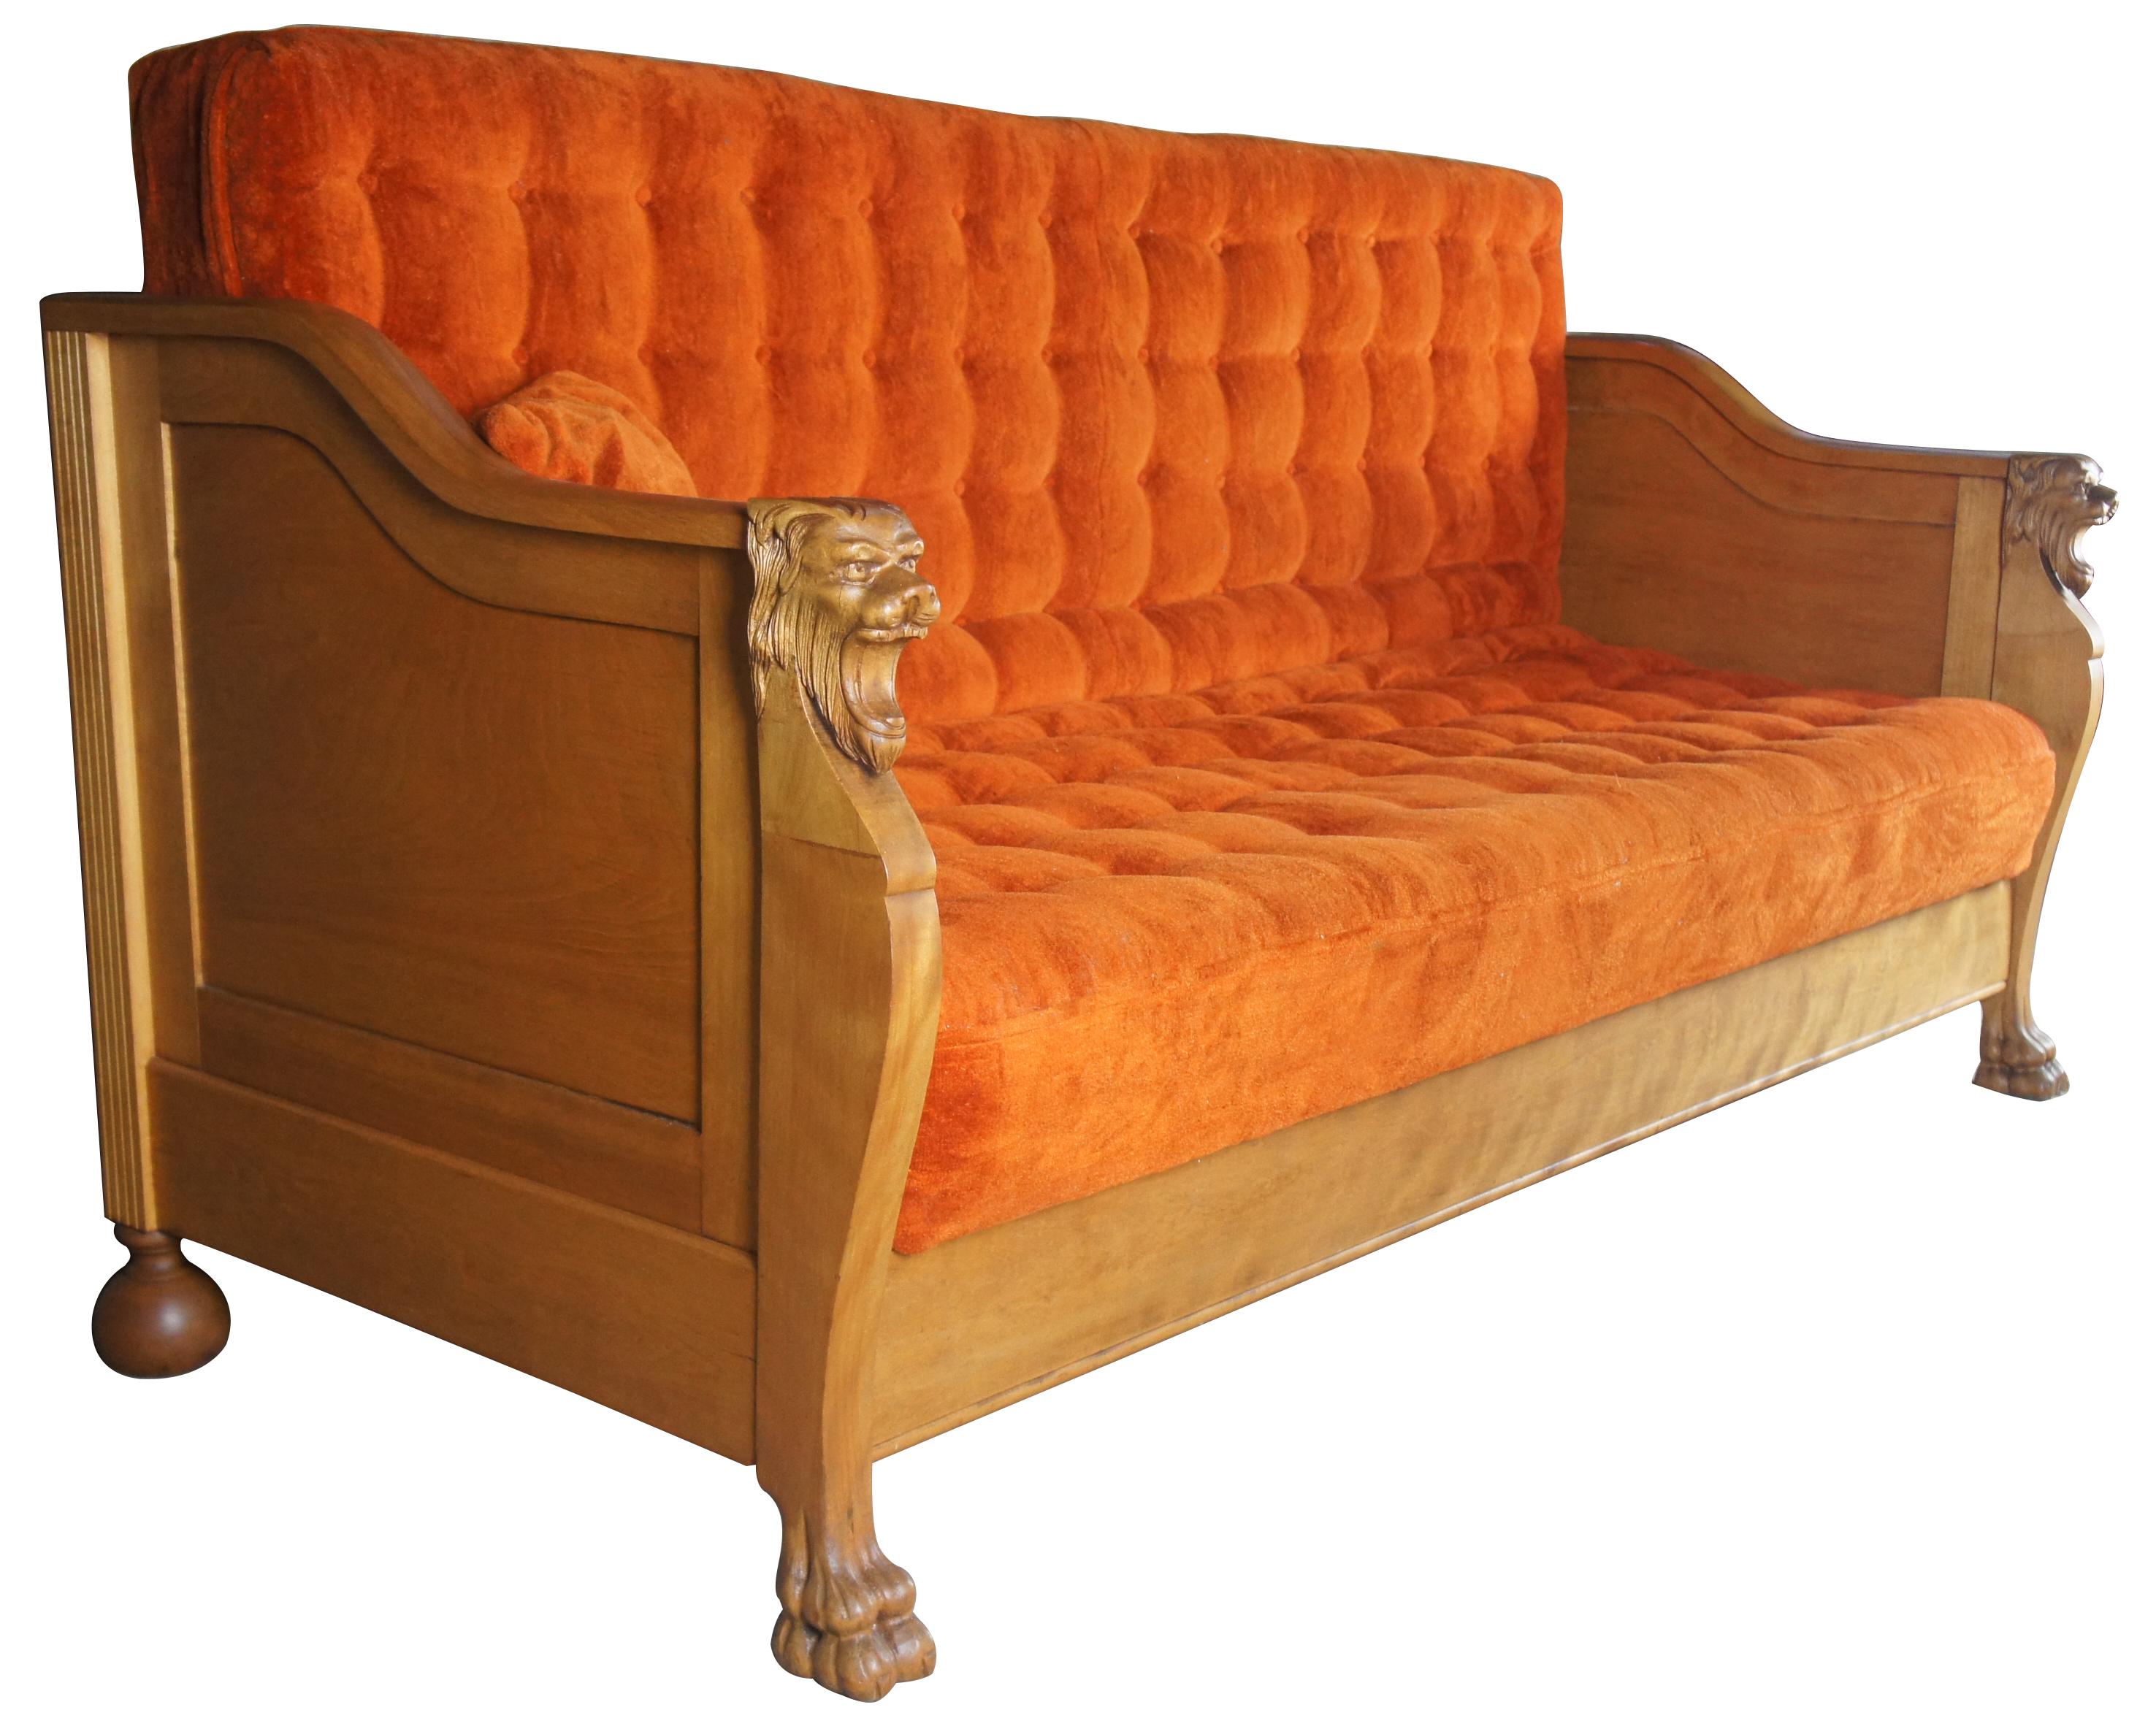 Antique Victorian walnut sofa bed Gothic Revival tufted figural lion heads paw

Amazing Victorian era sofa bed by Schauss MFG of Cleveland Ohio. Schauss operated from the late 19th-early 20th century. This sofa is made from walnut with lion head